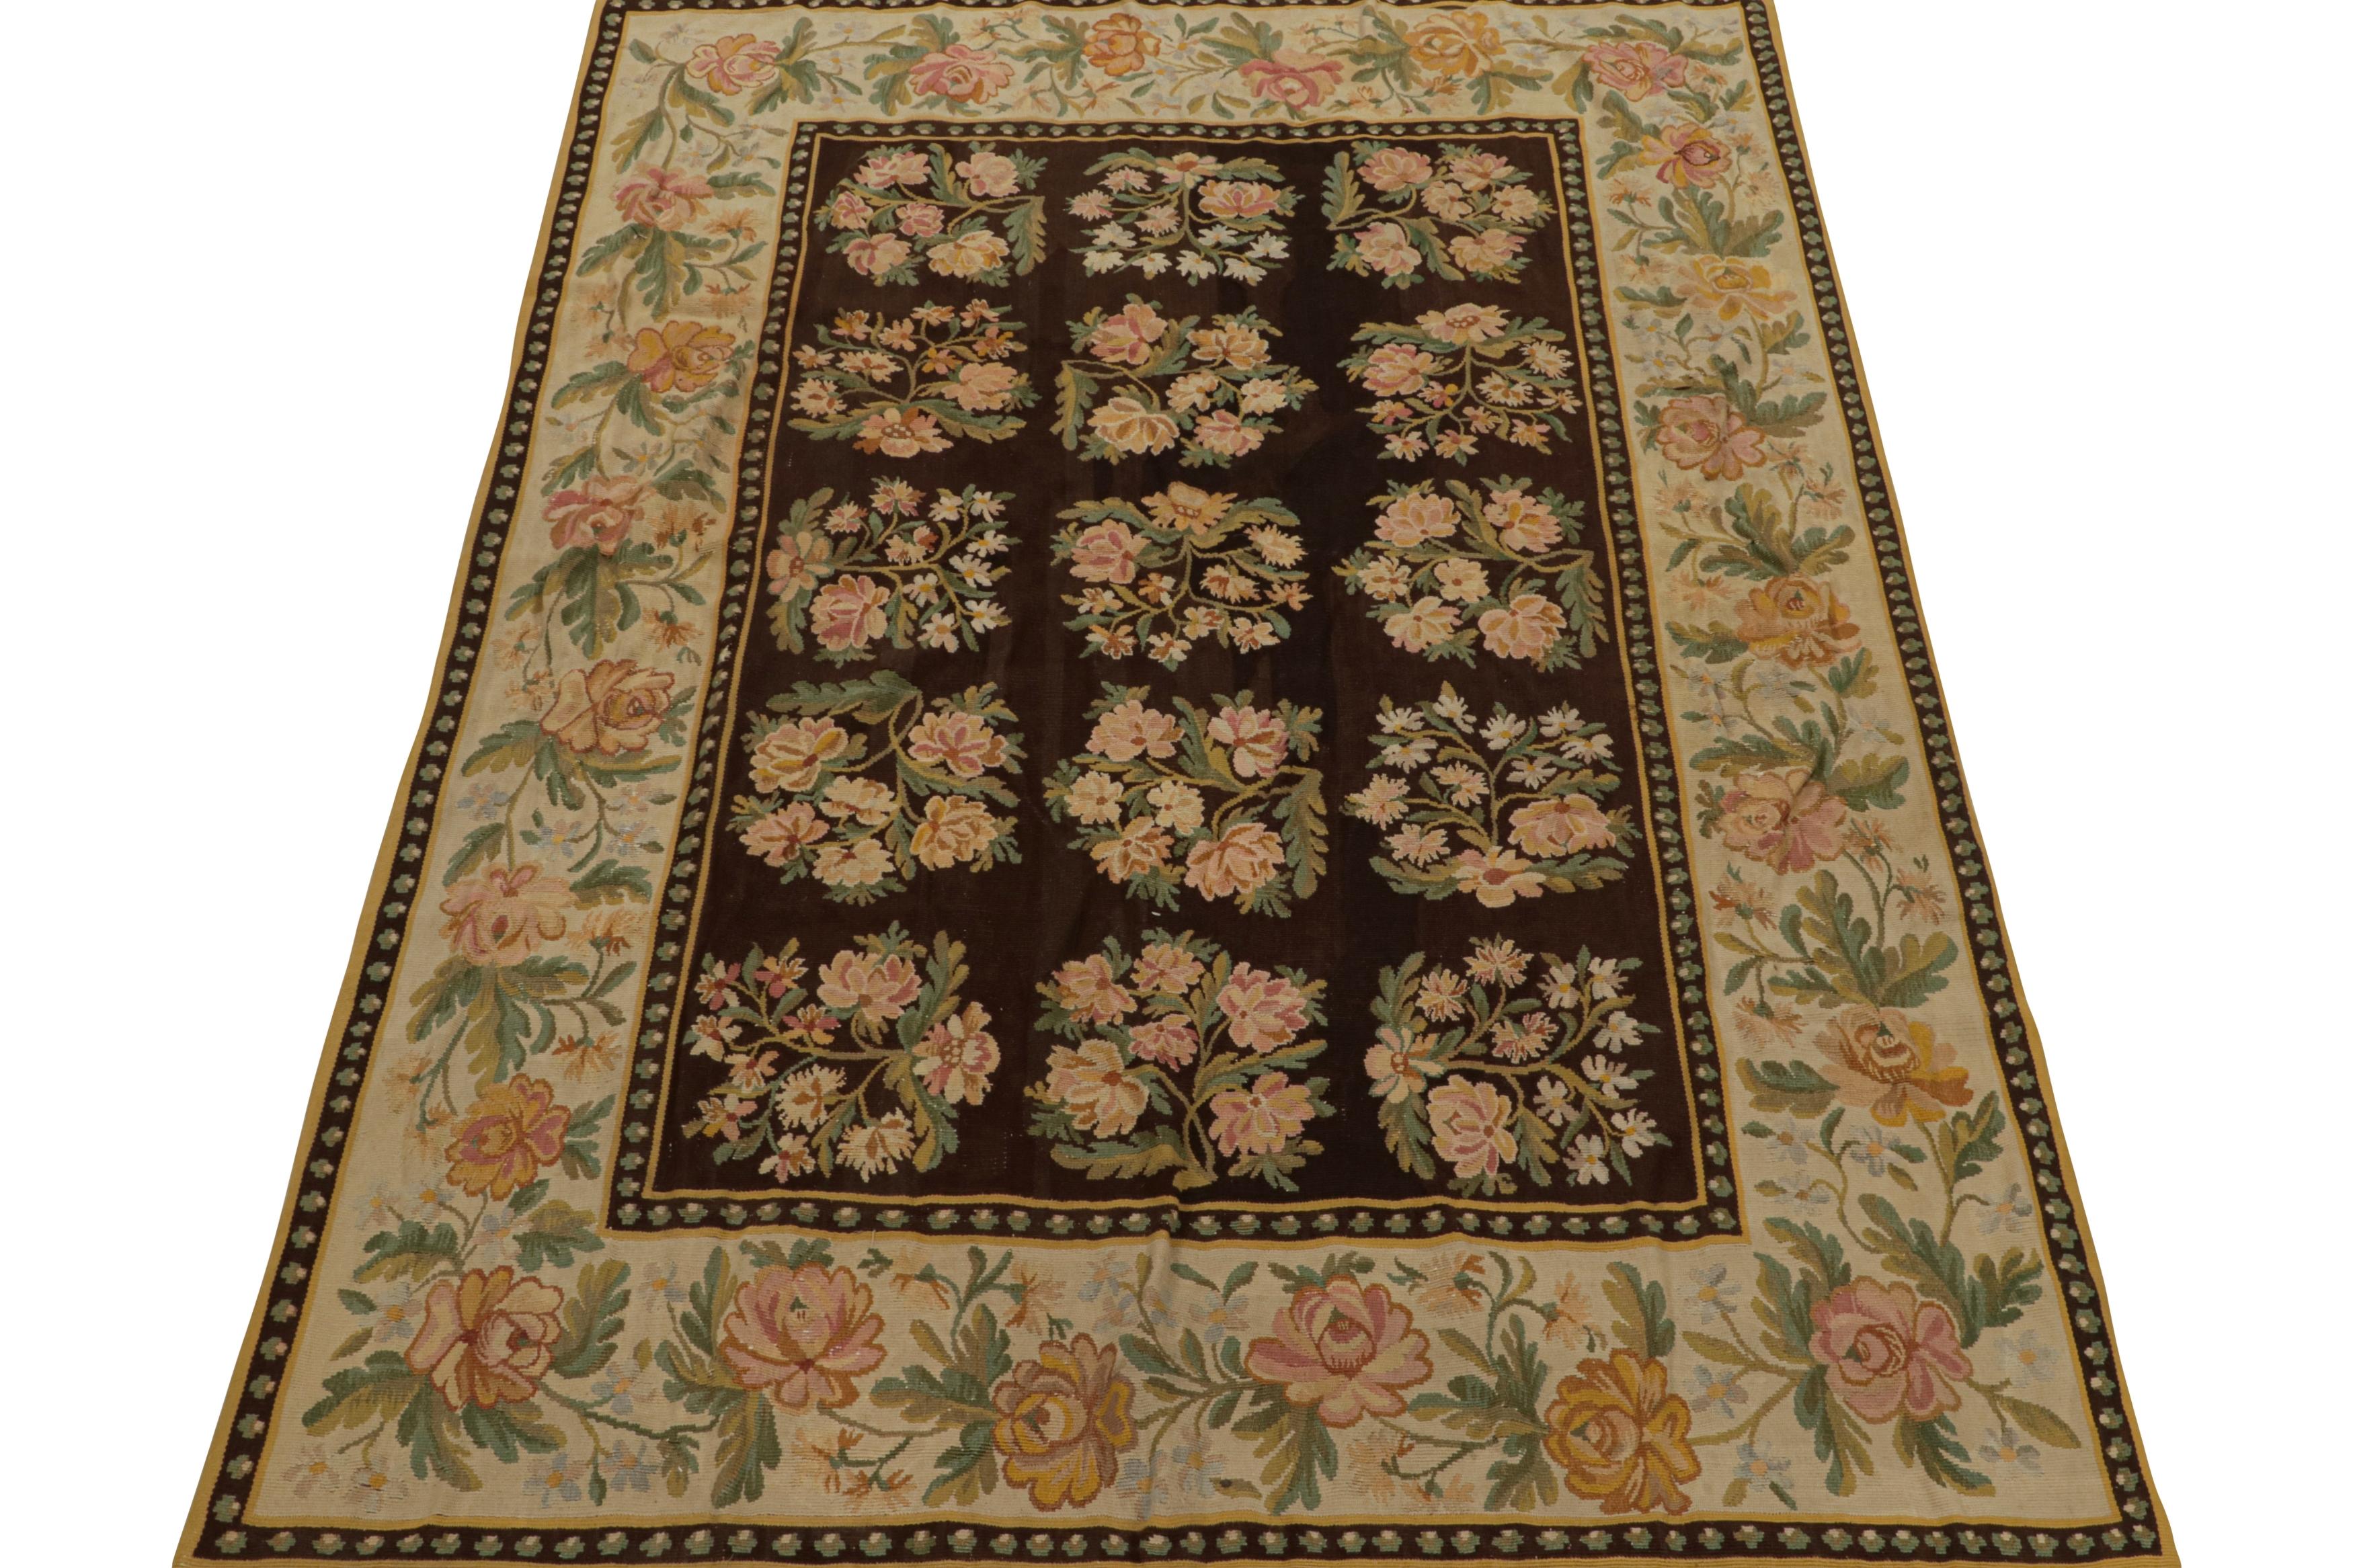 Romanian Antique Bessarabian Kilim rug in Brown with Floral Patterns from Rug & Kilim For Sale